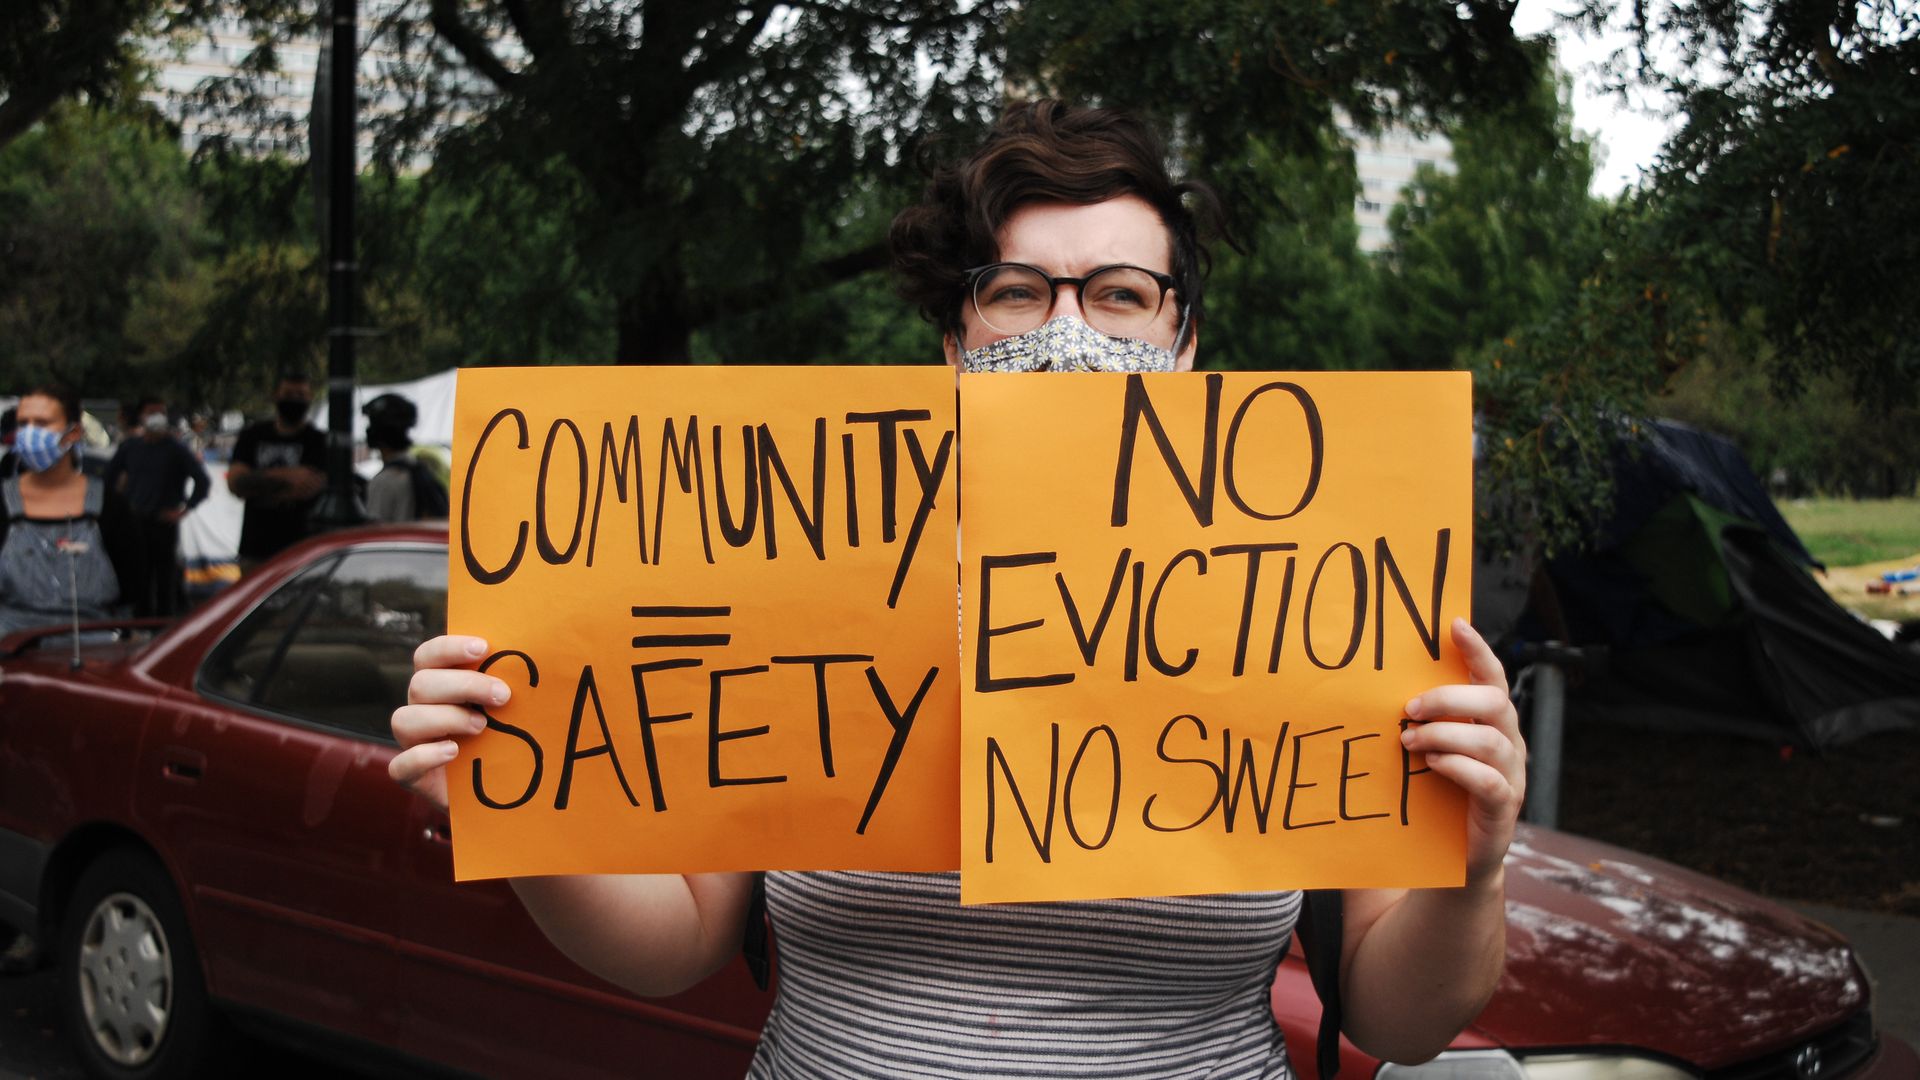 A protestor holding signs calling for a halt to evictions.